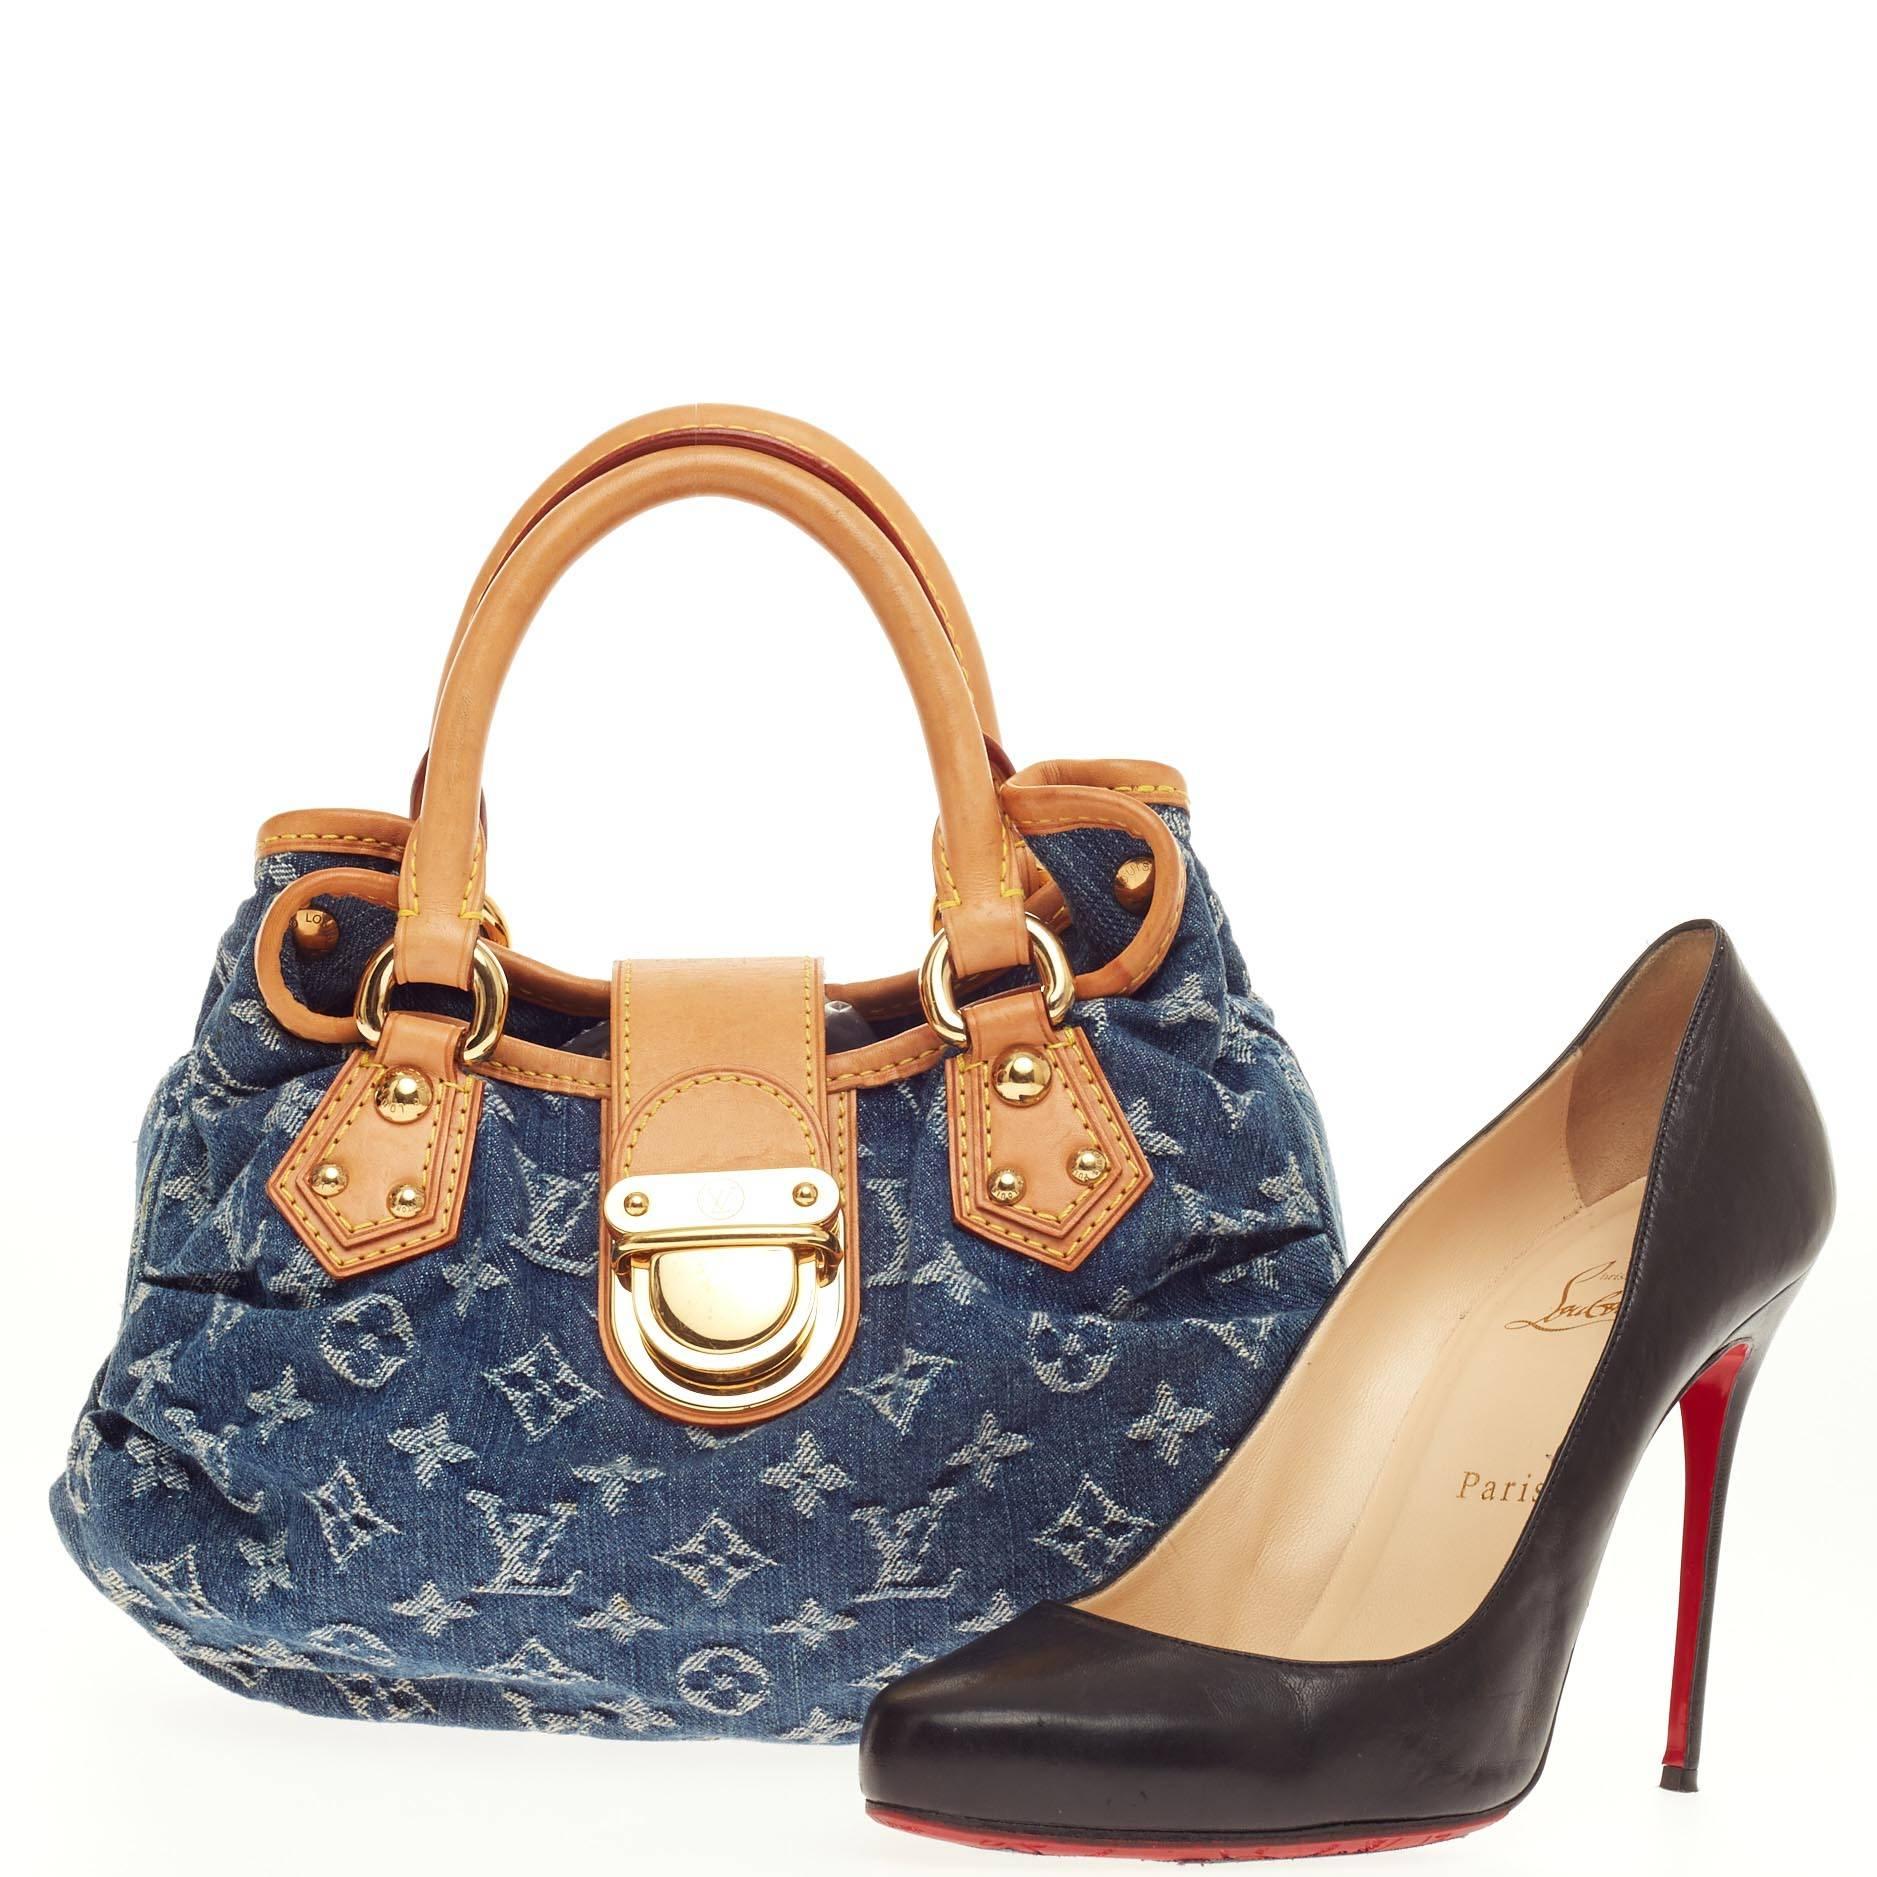 This authentic Louis Vuitton Pleaty Denim Mini showcases a fun twist to the classic monogram design. Crafted from stonewashed blue monogram denim, this small hobo features dual-rolled vachetta leather handles, vachetta leather trims with yellow